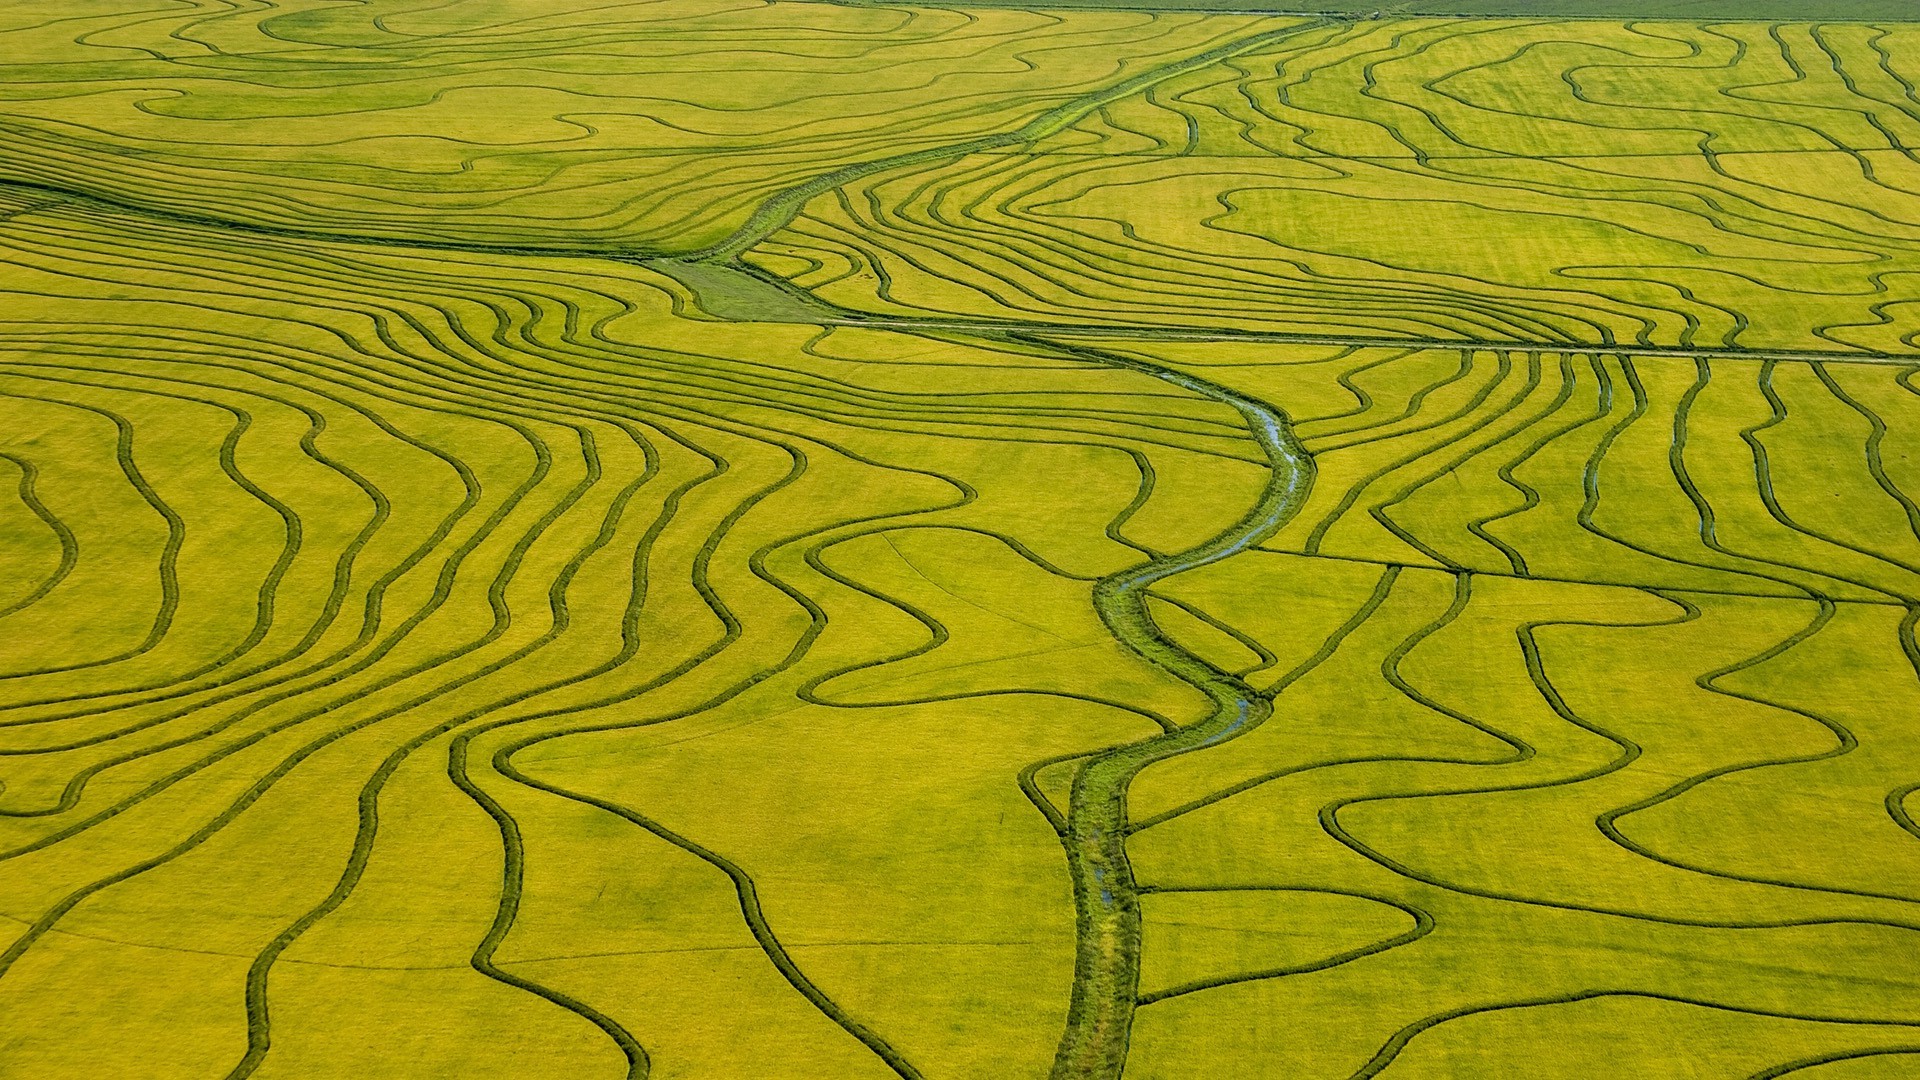 nature, Landscape, Green, Field, River, Bird's Eye View, Rice Paddy, Aerial View Wallpaper